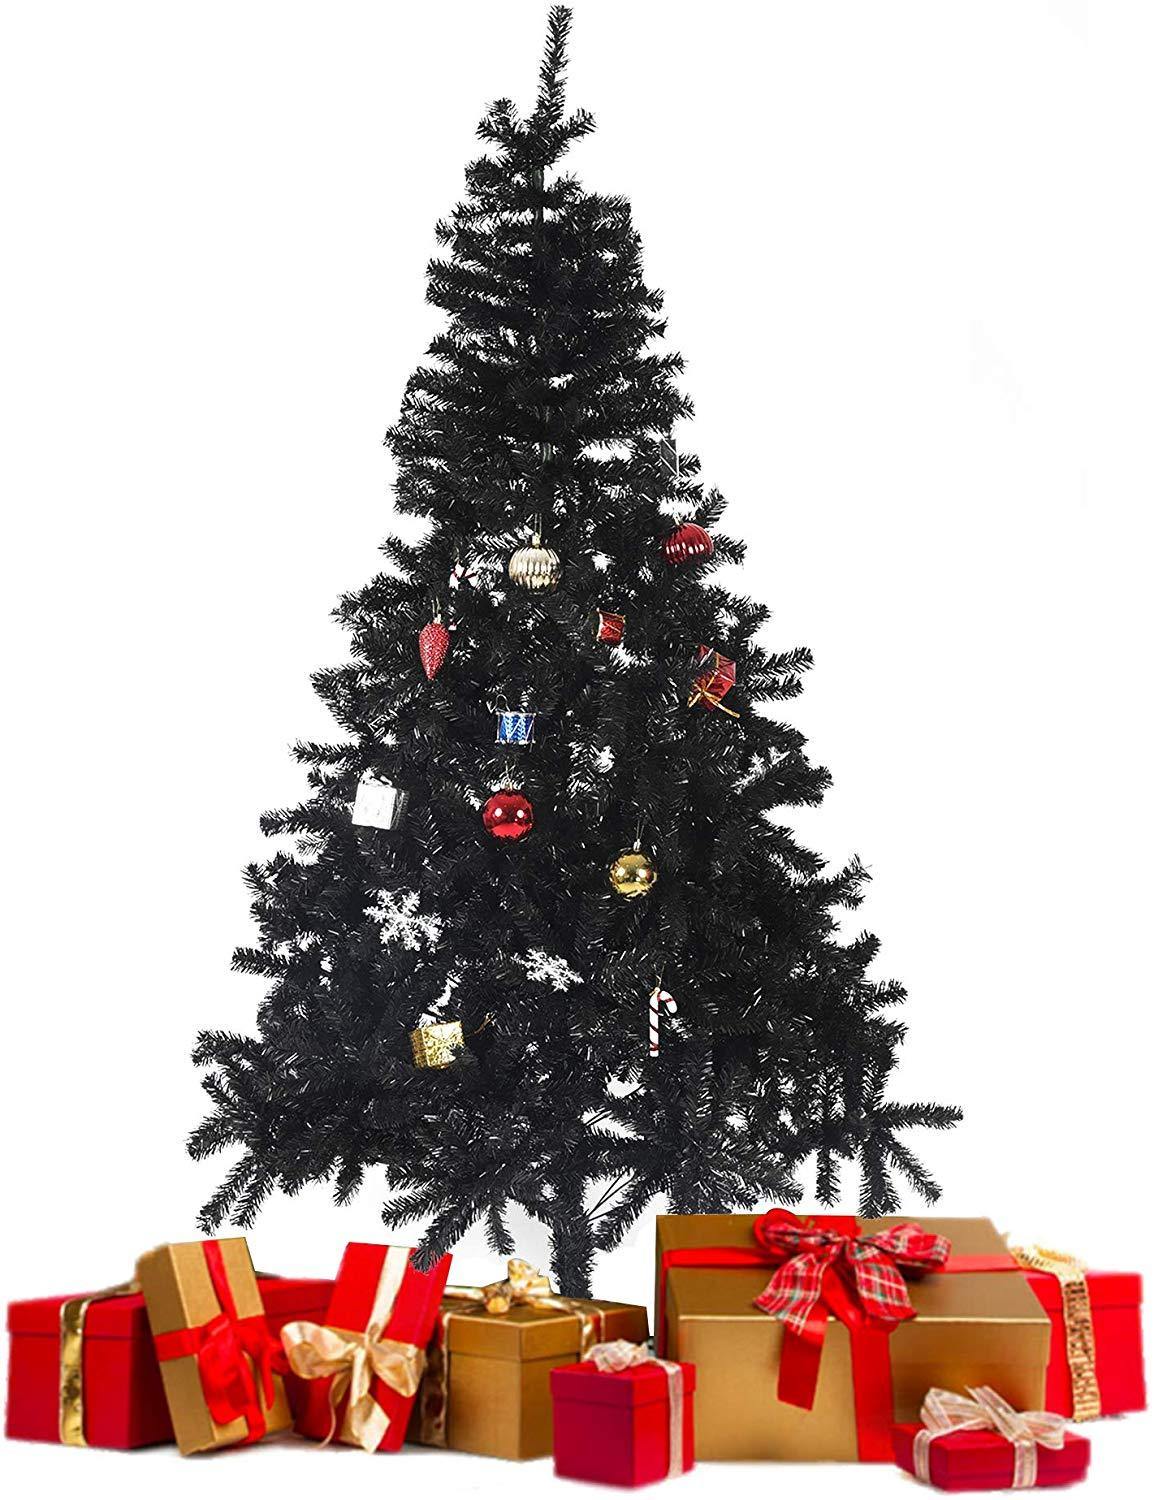 Bosonshop 7' Premium Artificial Christmas Tree with Solid Metal Stand, Festive Indoor and Outdoor Decoration, Black